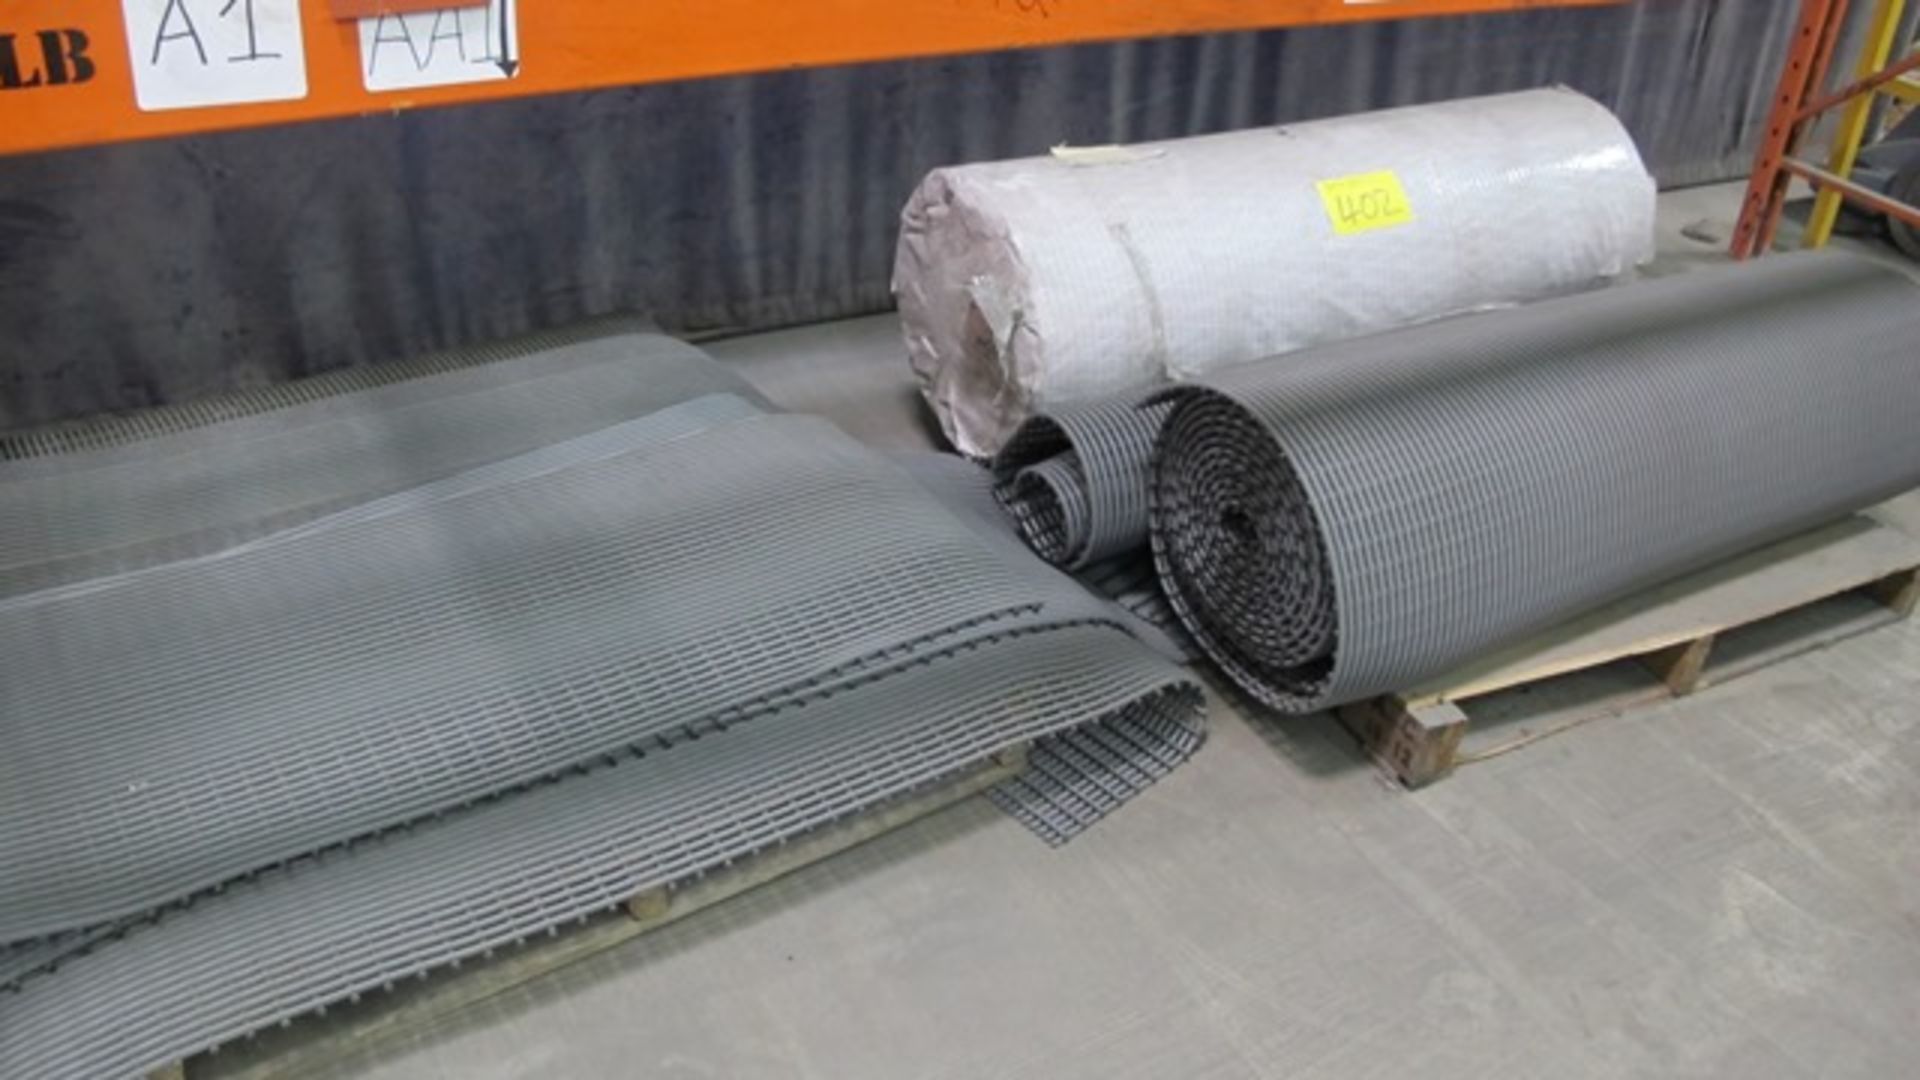 PALLETS OF SHOP MATS AND ROLLED MATS